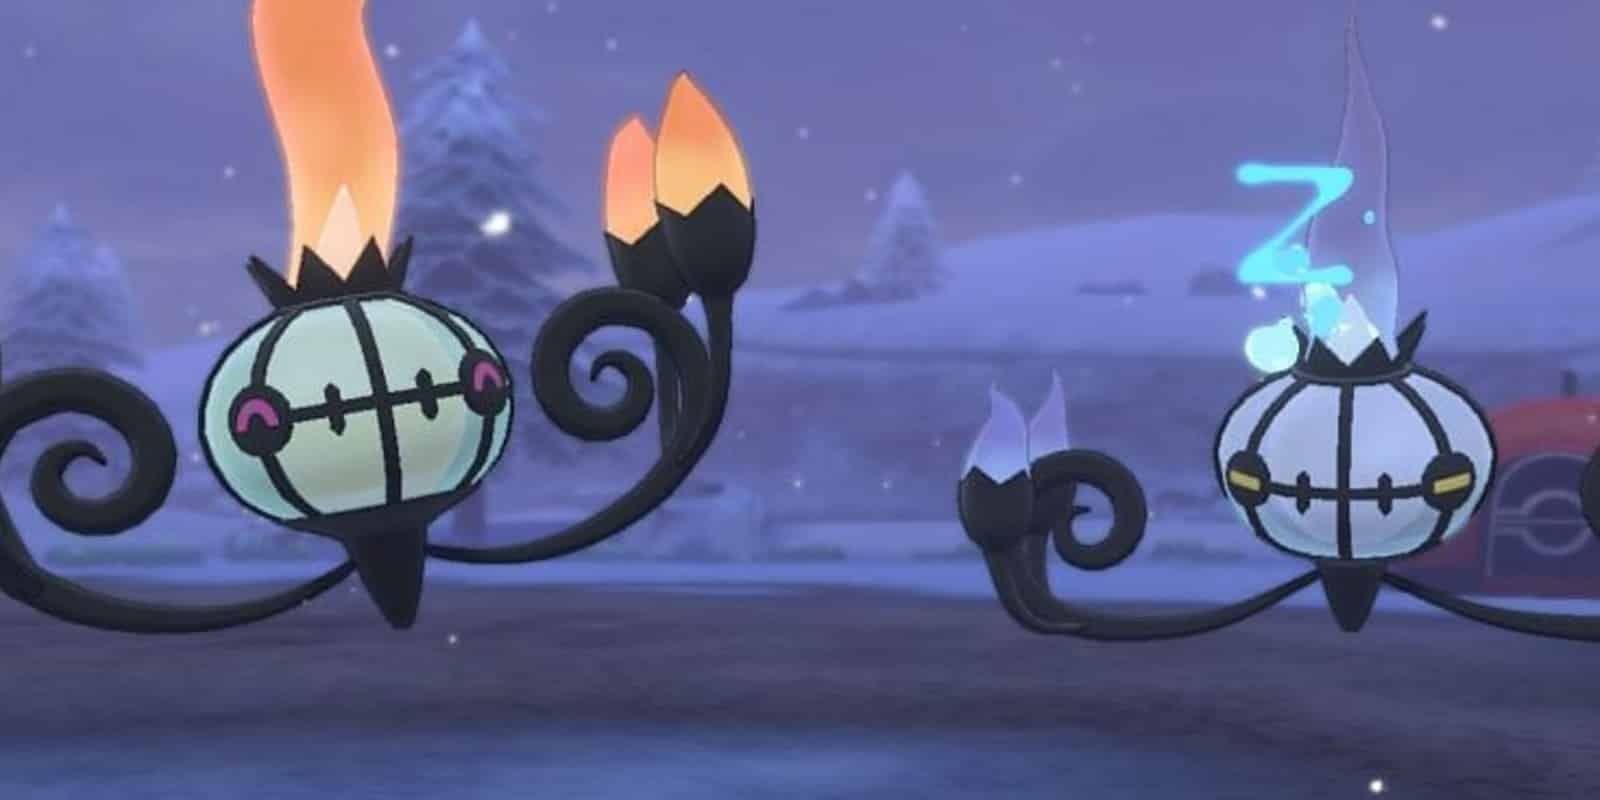 A Shiny and regular Chandelure together in Pokémon on Nintendo Switch.